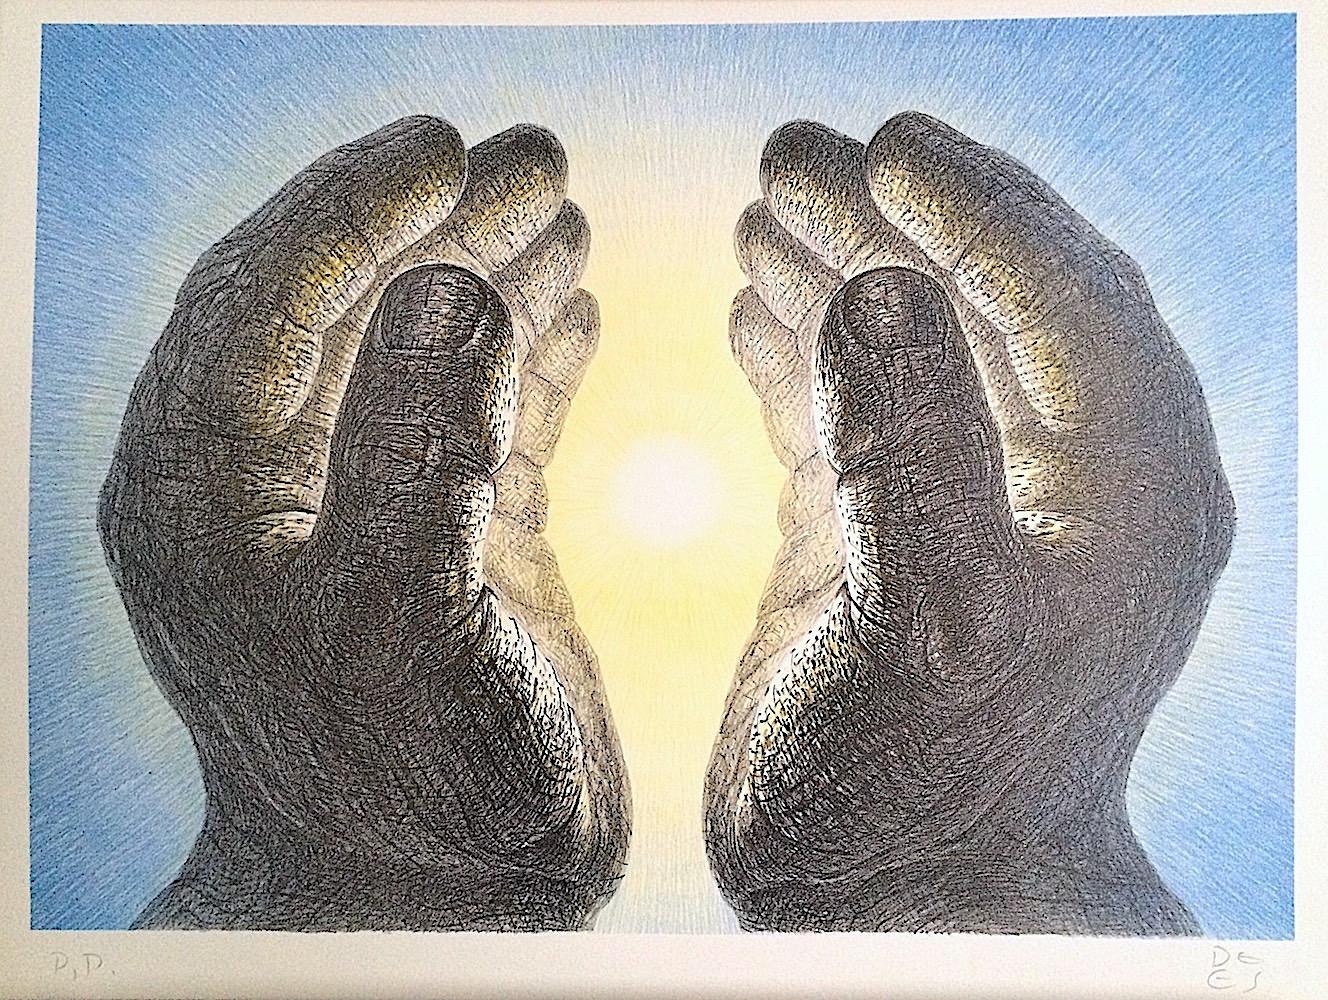 GLOWING HANDS Signed Lithograph, Cupped Hands Portrait, Yellow Light, Blue Sky